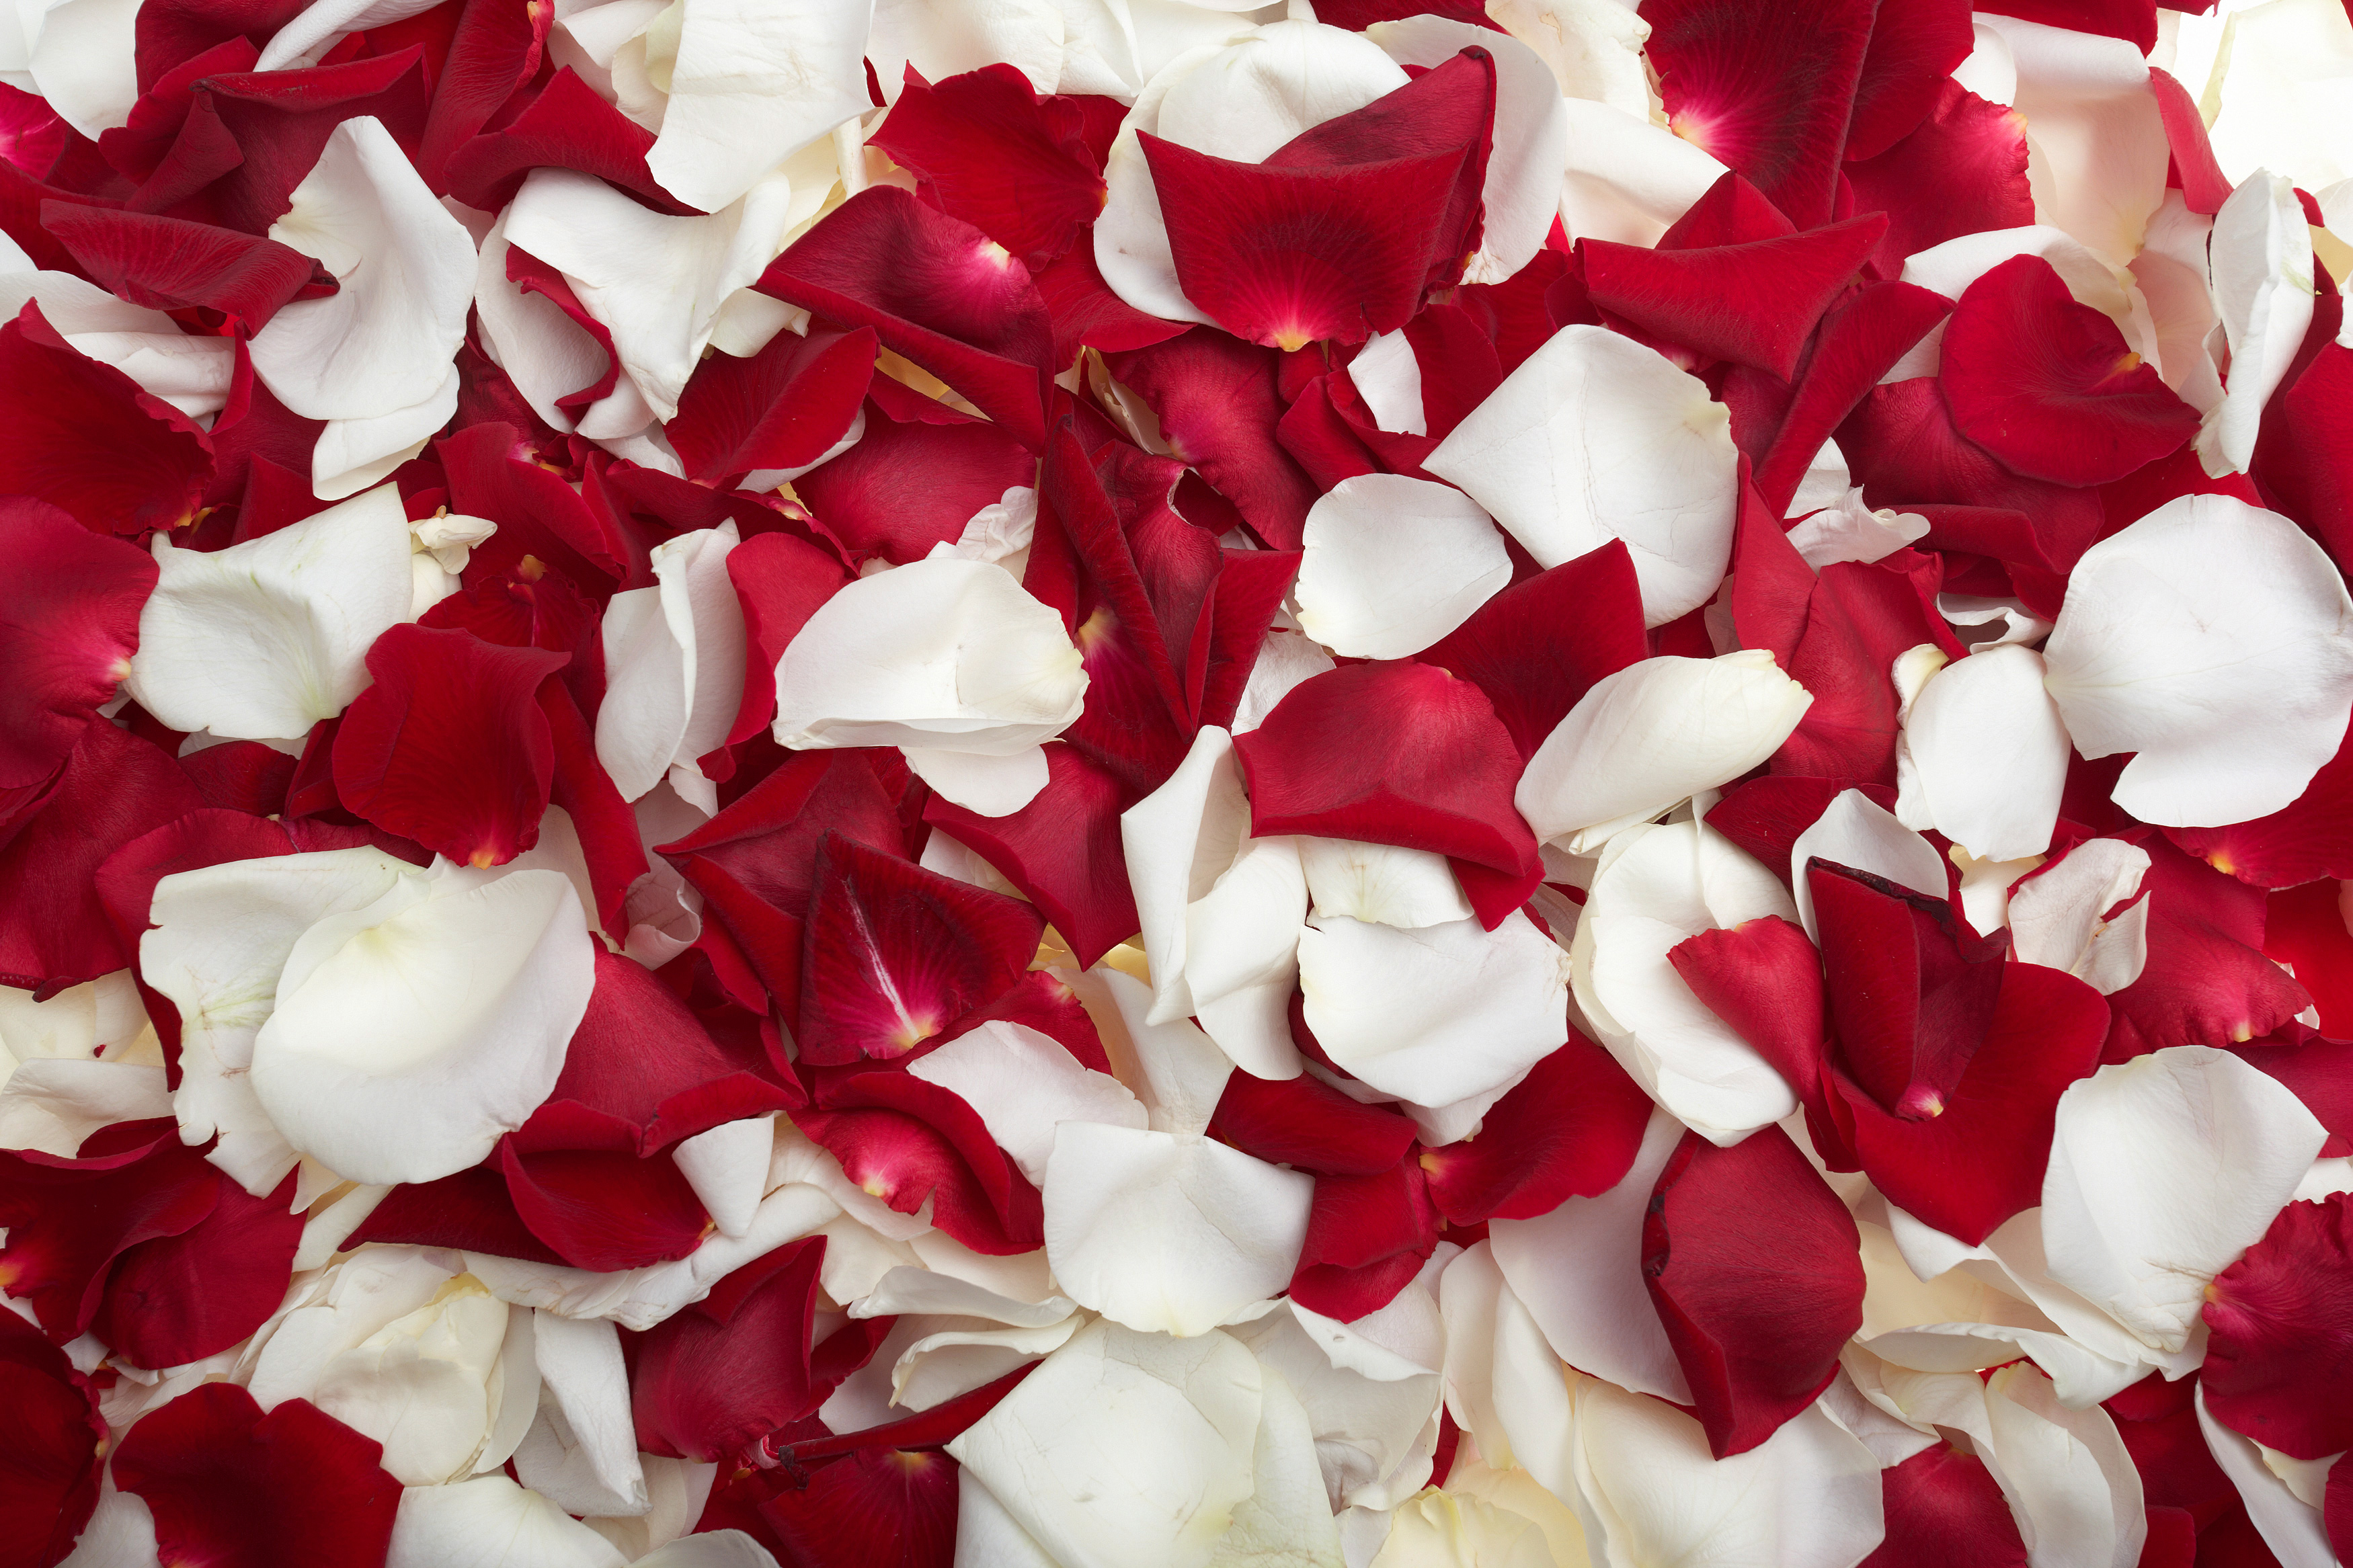 White and Red Rose Petals Background | Gallery Yopriceville - High ...